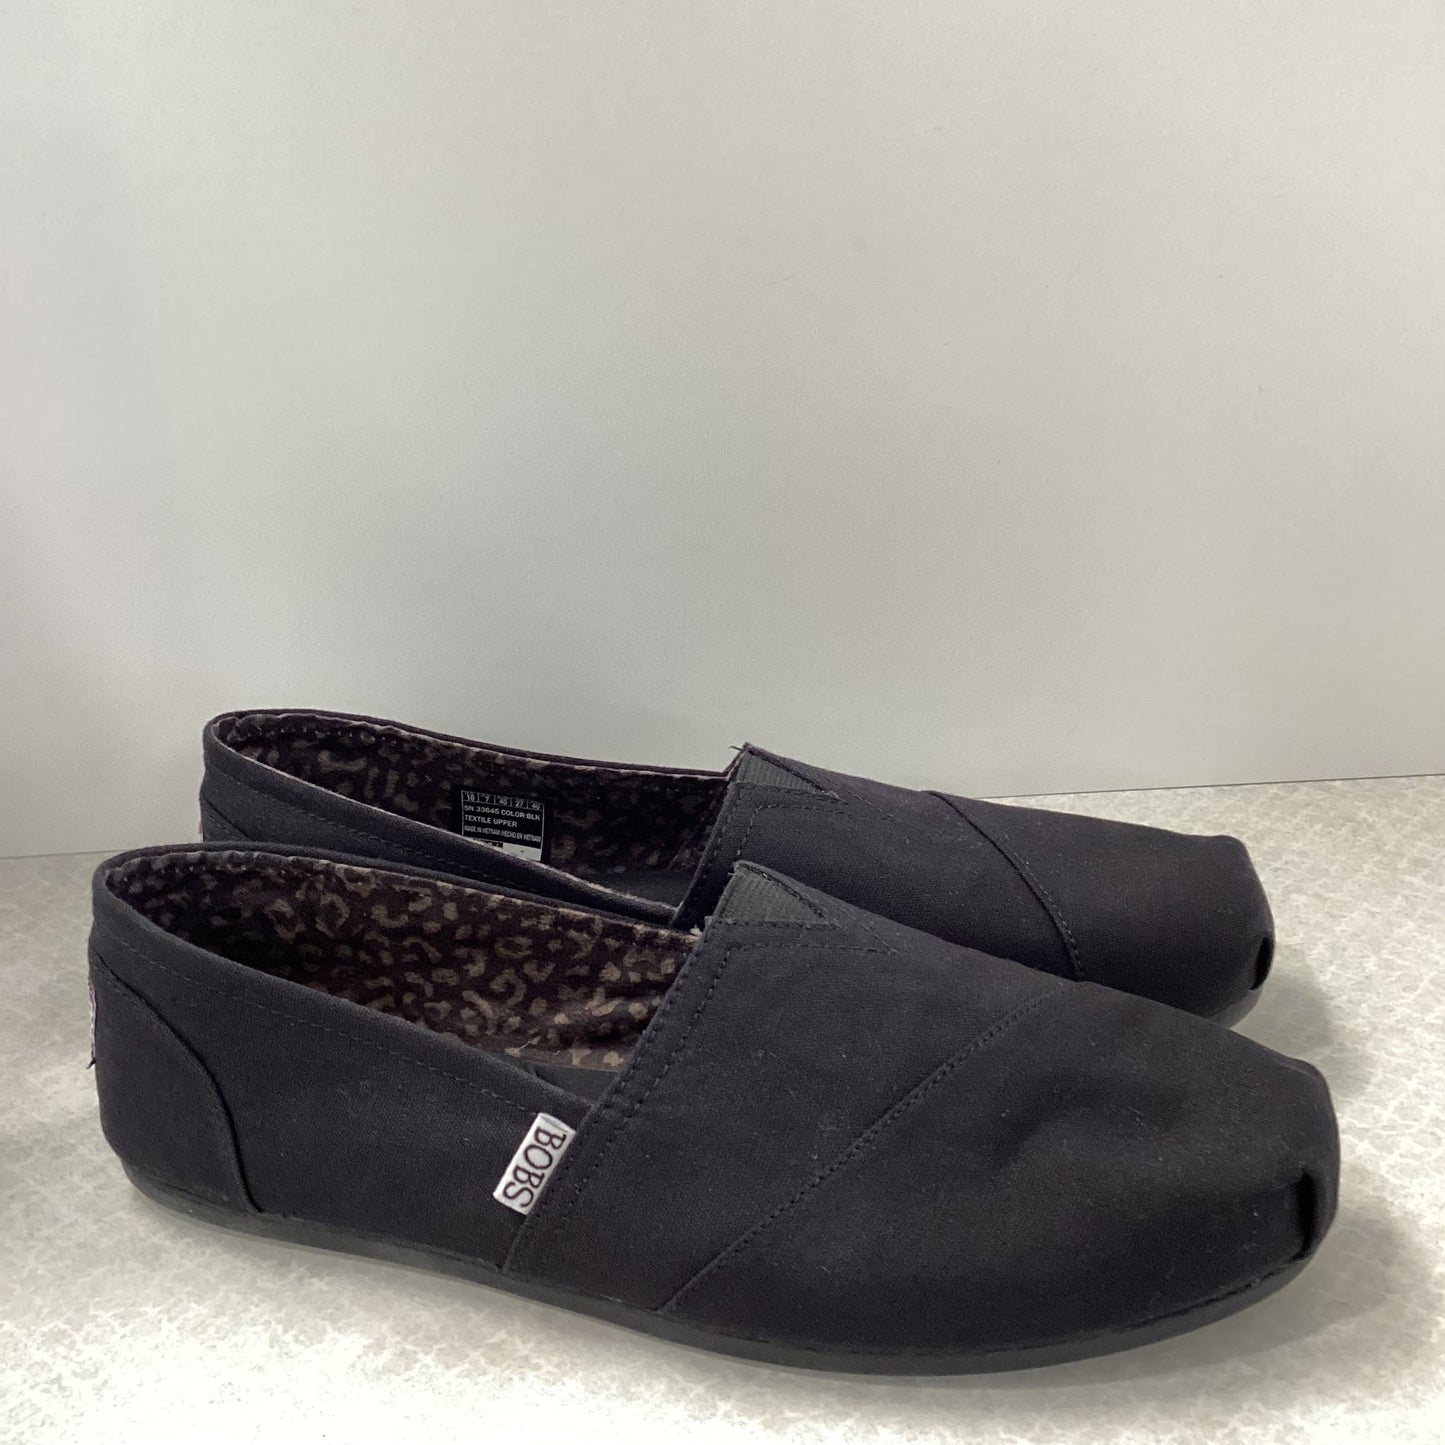 Shoes Flats Moccasin By Bobs  Size: 10